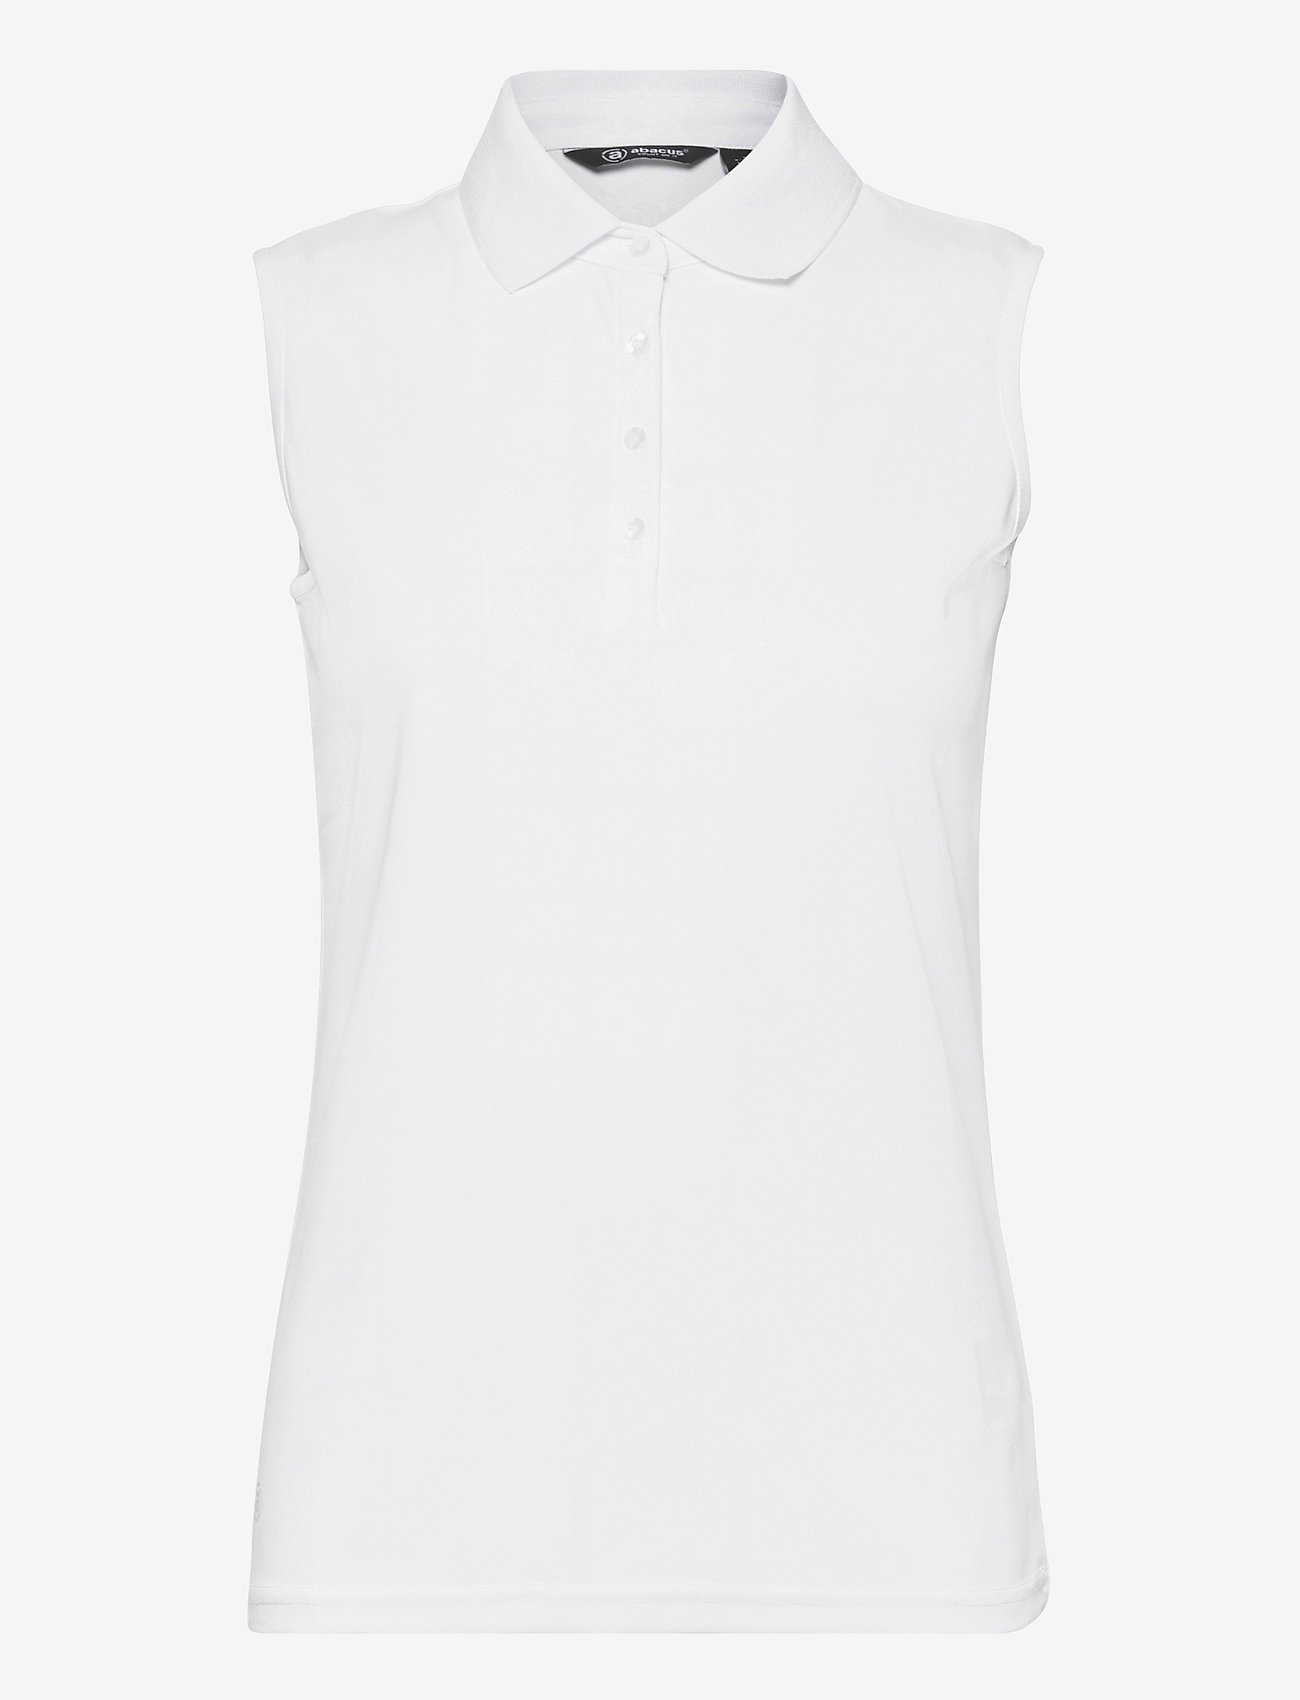 Abacus - Lds Cray sleeveless - polos - white - 0